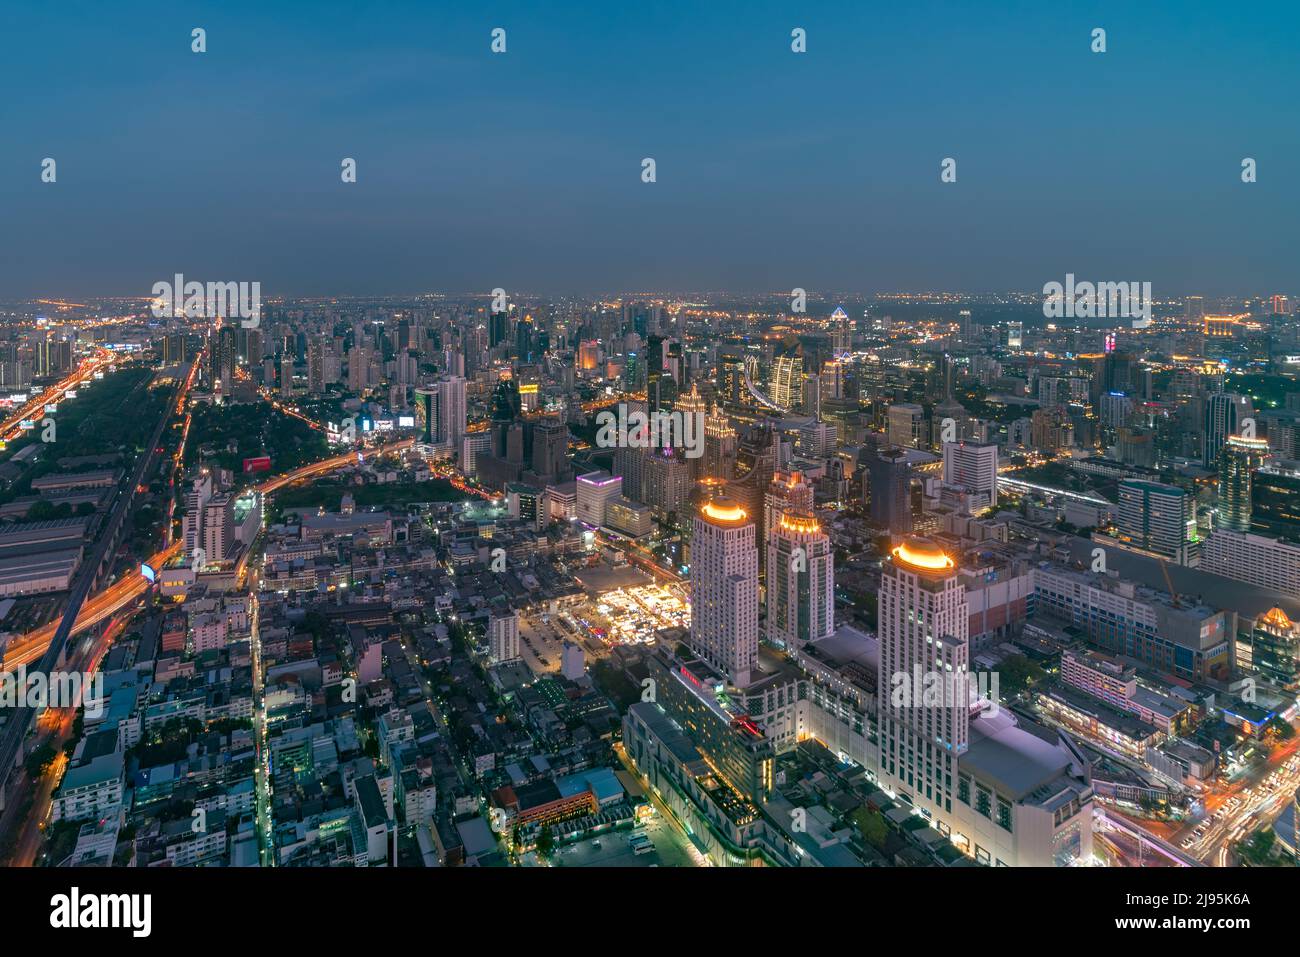 The city skyline of Bangkok Thailand and its skyscrapers at sunset Stock Photo